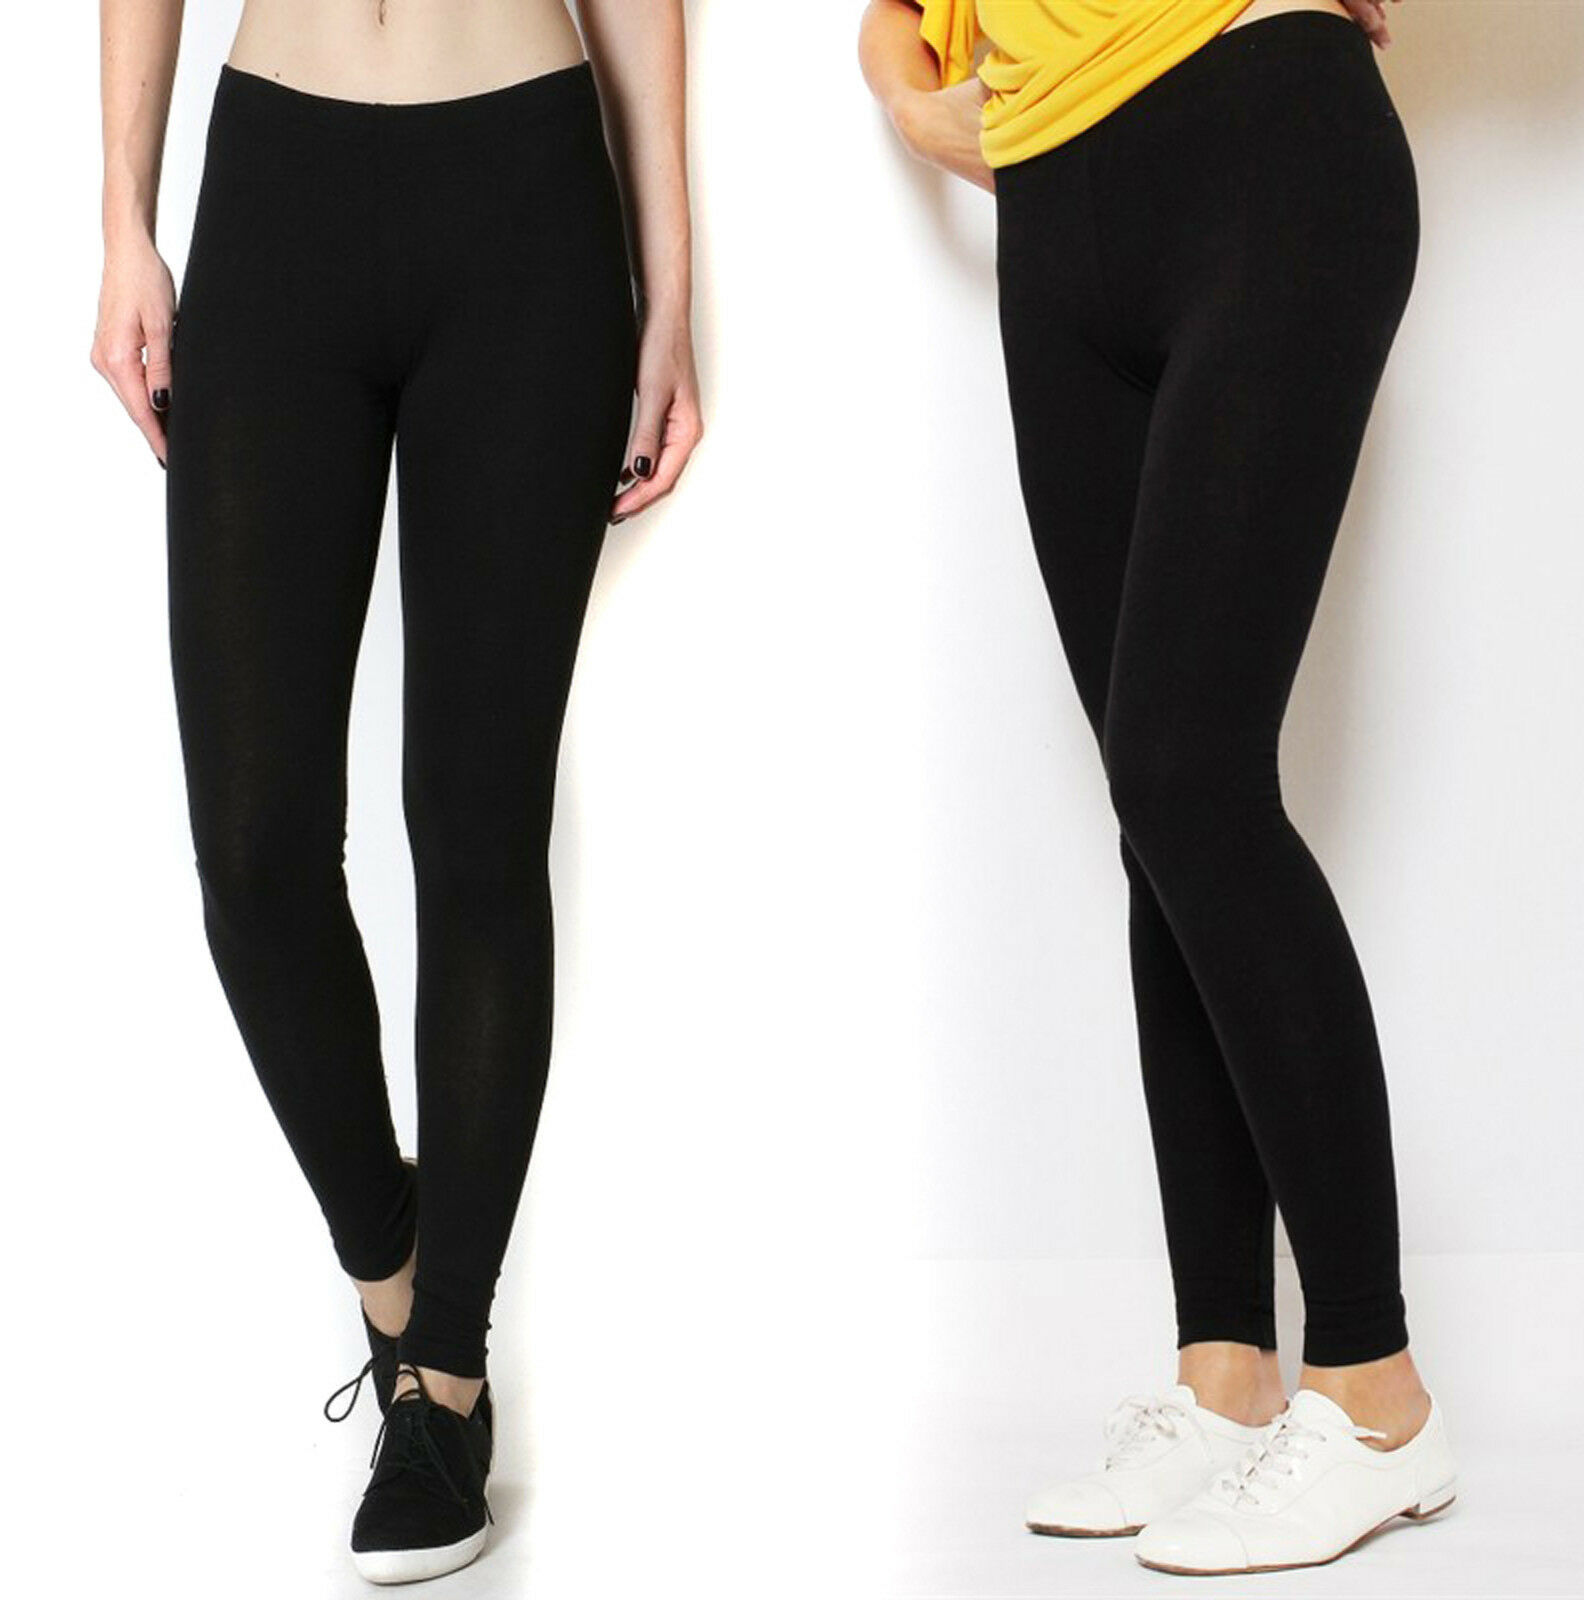 Stretch Yoga Pants For Women